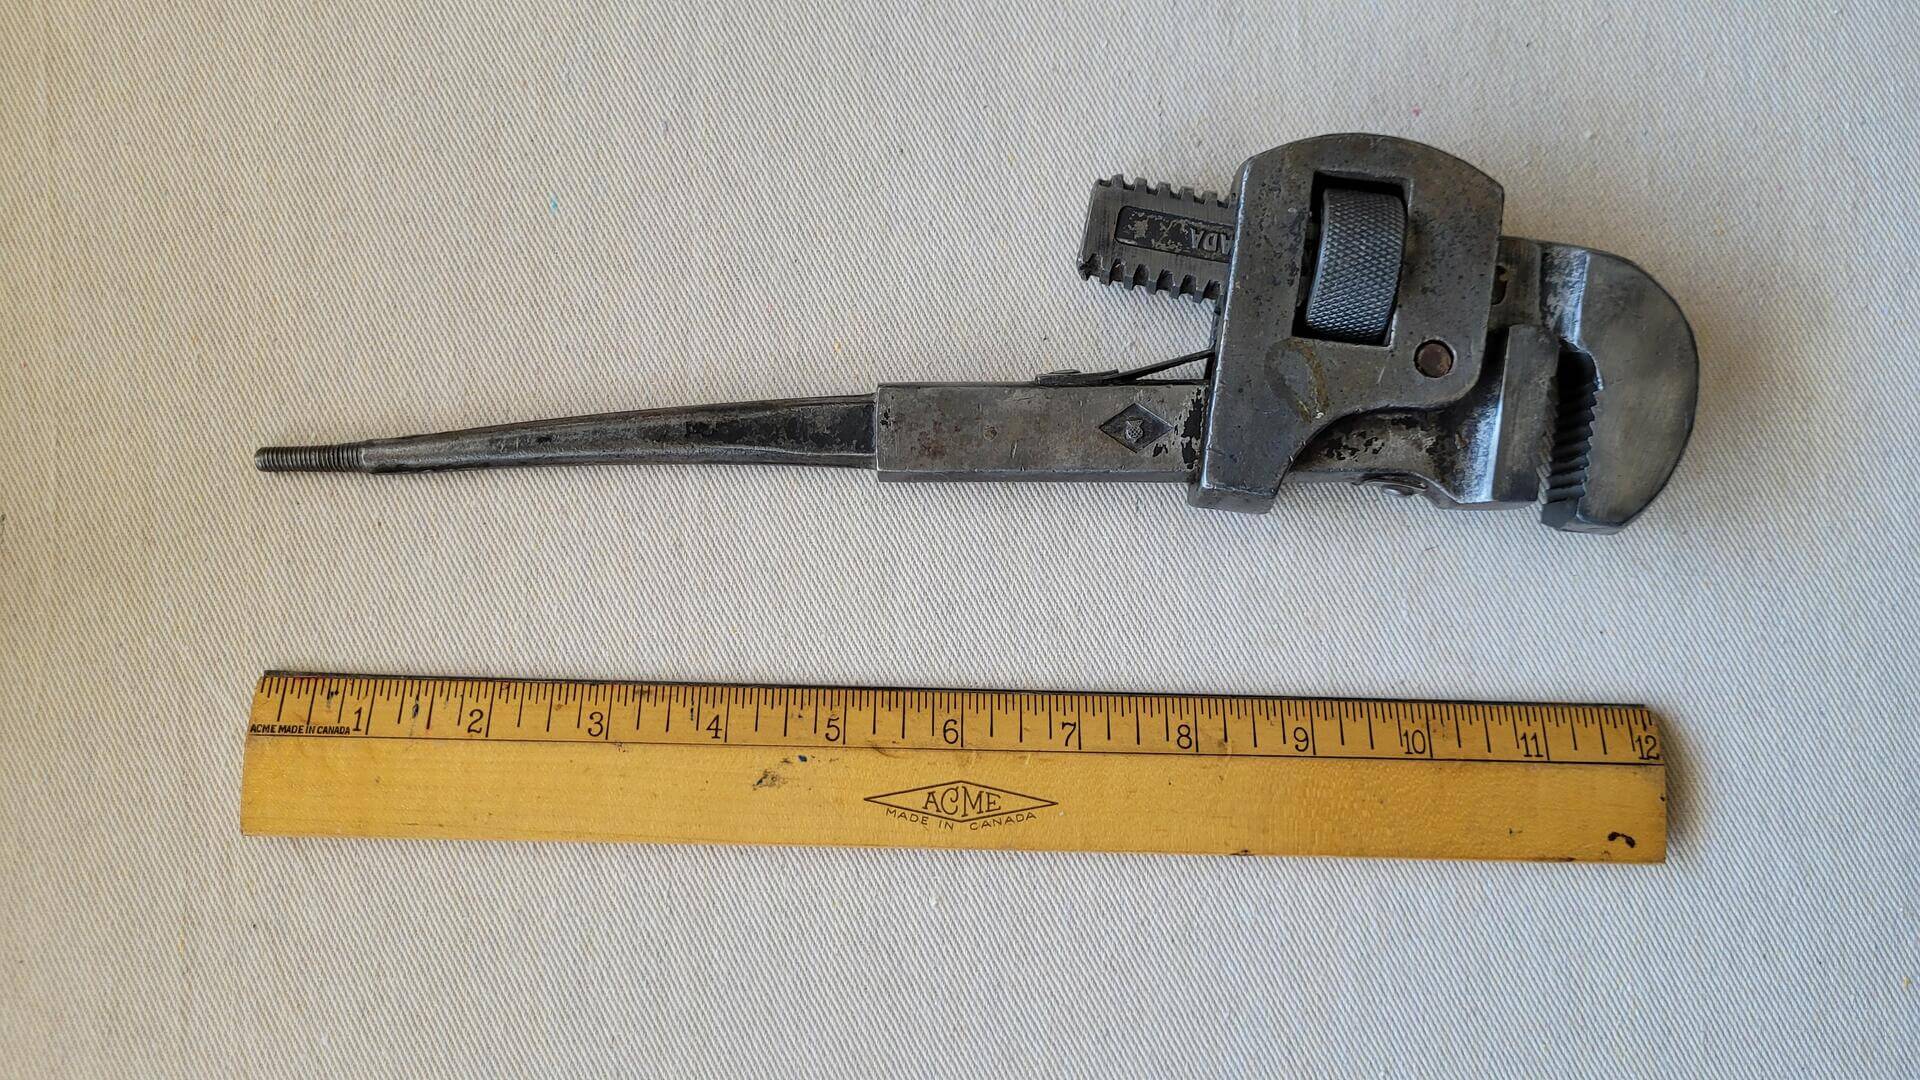 Vintage 14" Stillson type pipe adjustable monkey wrench threaded handle end by McKinnon Industries. Antique made in Canada machinist and plumbing hand tools